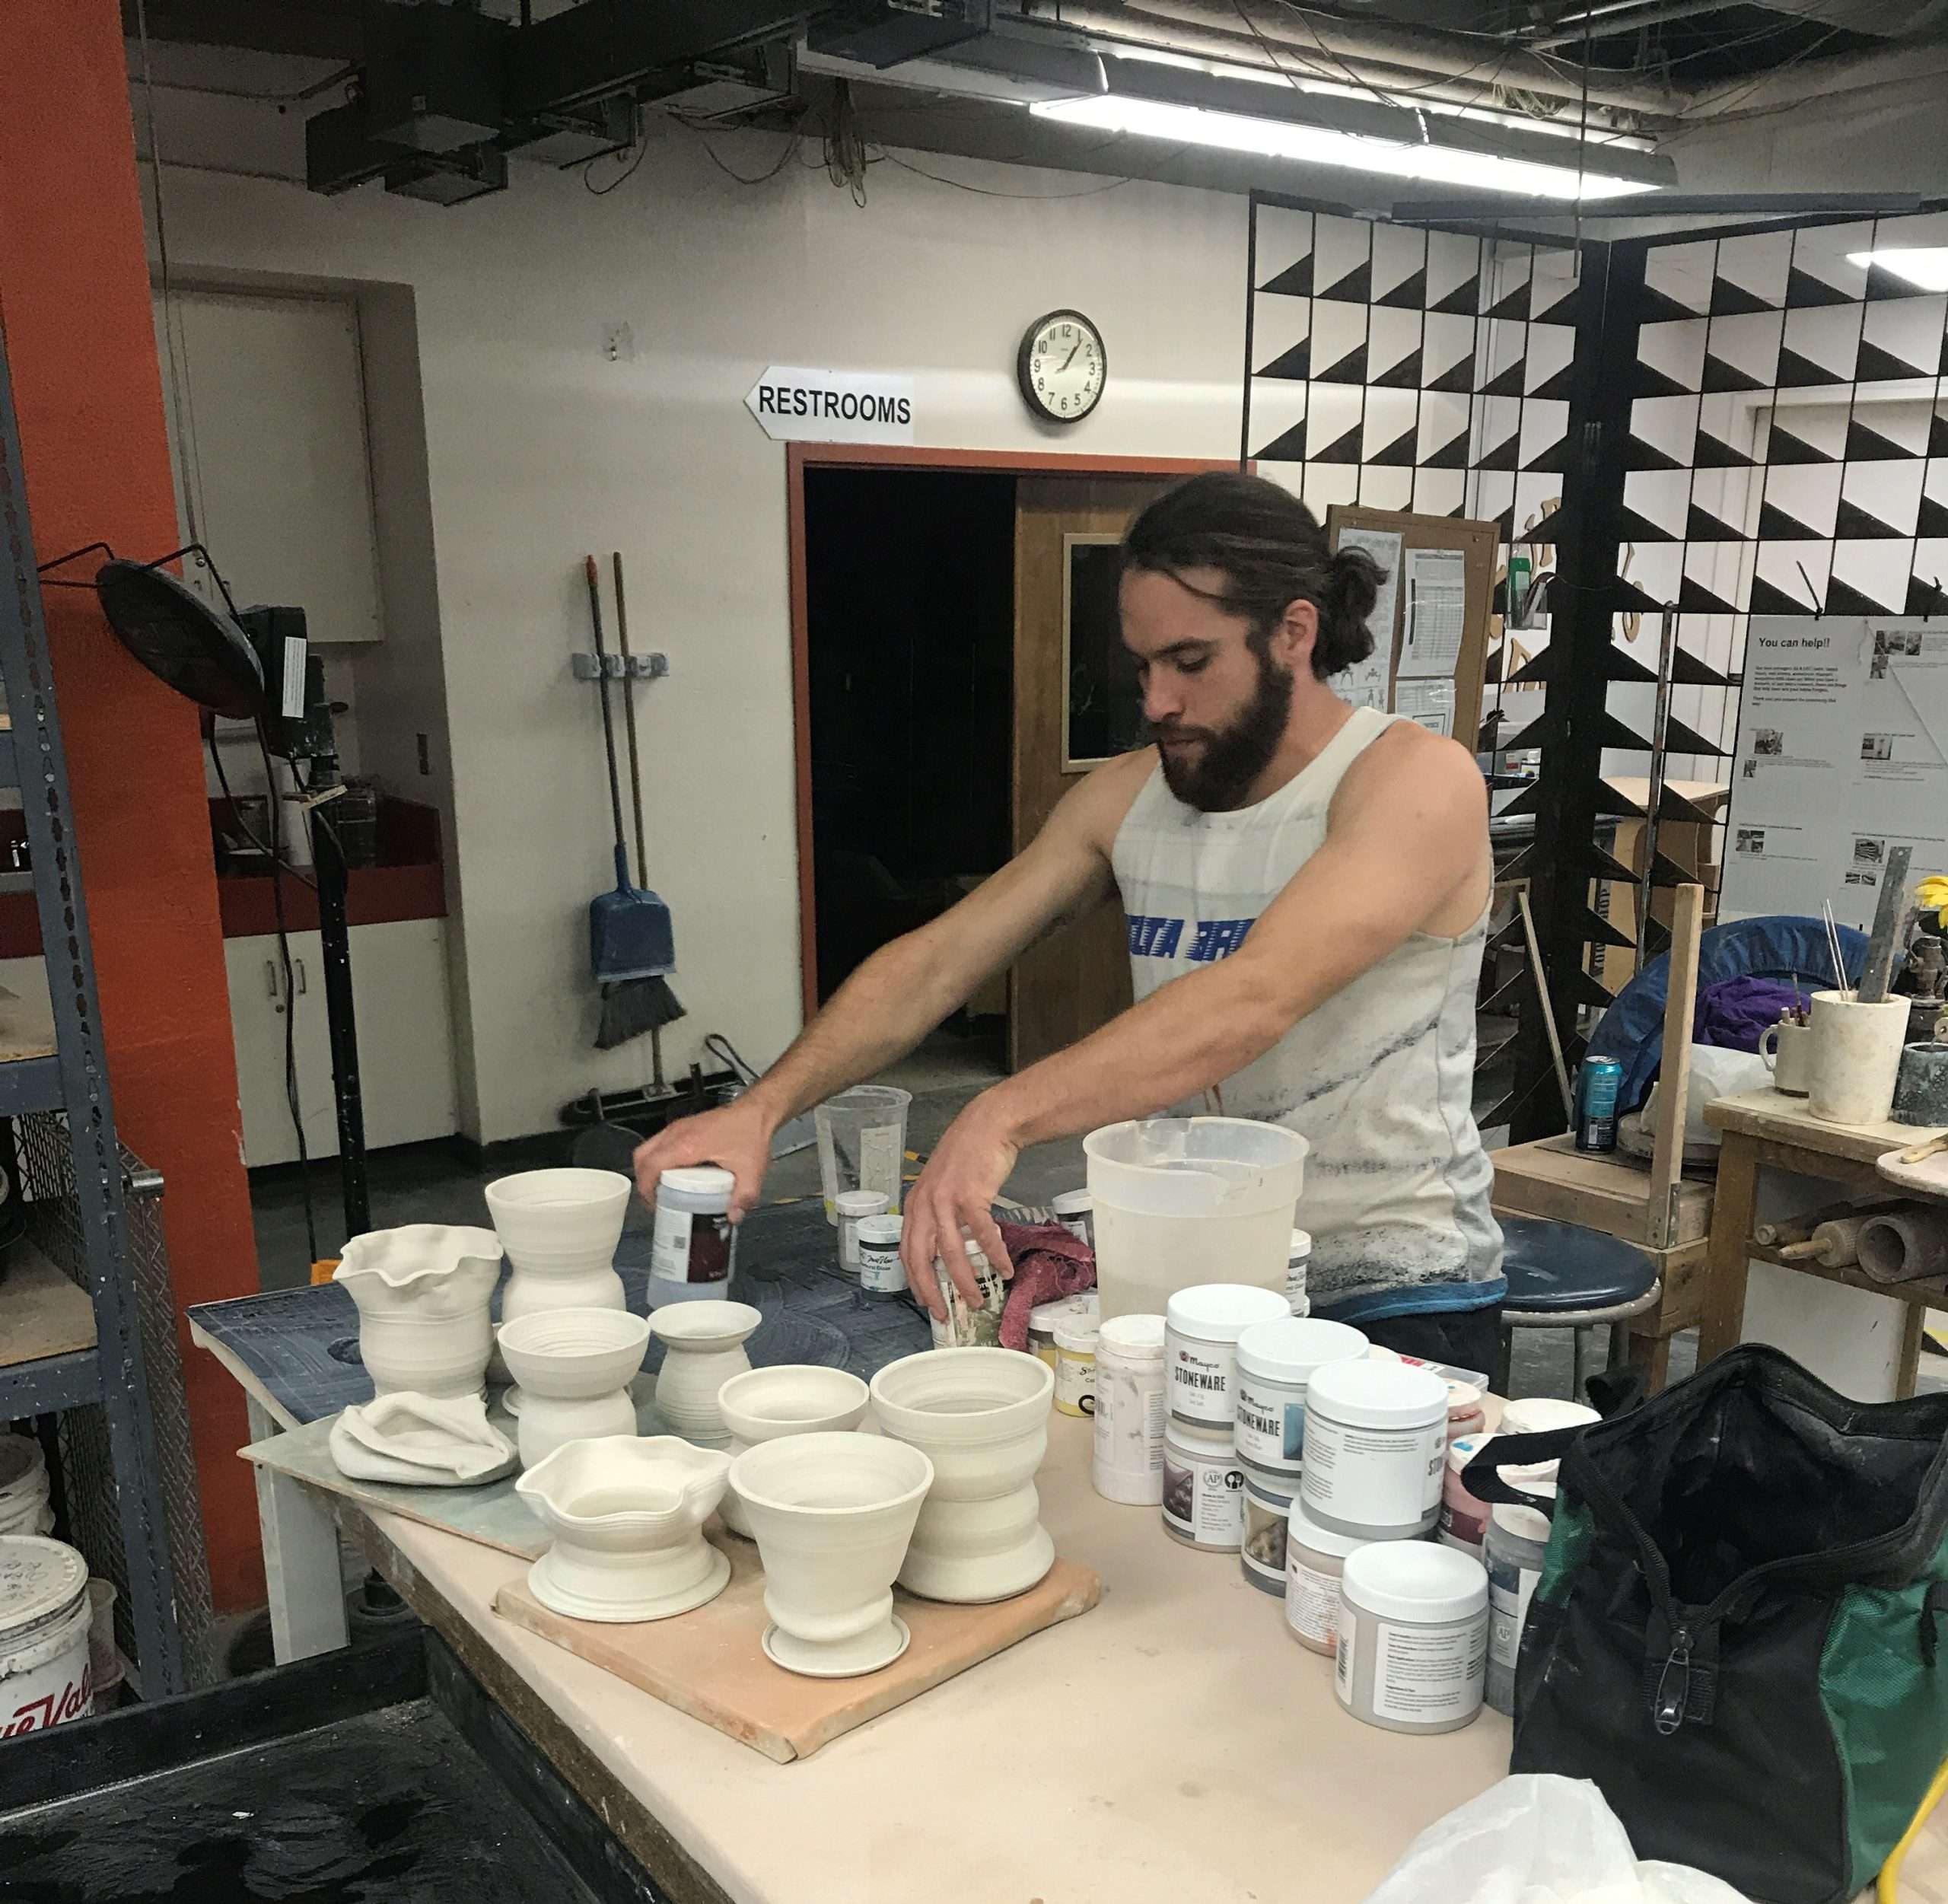 ceramics qualification class. Learn to use the ceramics studio at The Curious Forge